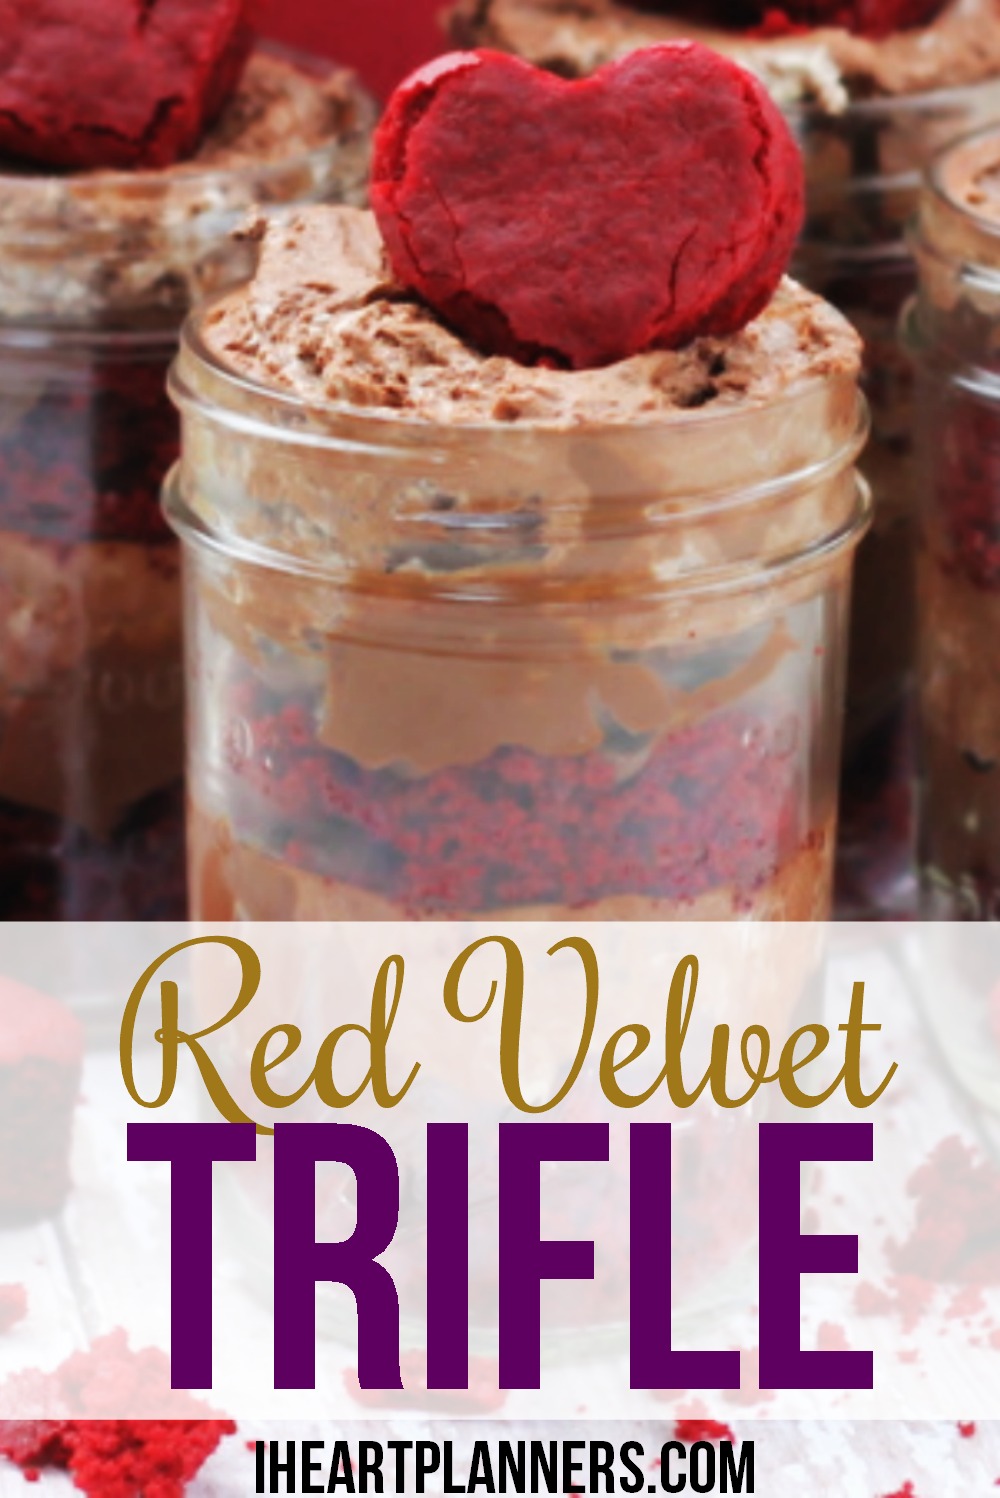 Red Velvet Trifle - This chocolate dessert is perfect for Valentine's Day or any holiday! Red velvet cake with chocolate mousse and chocolate pudding. A match made in heaven! 